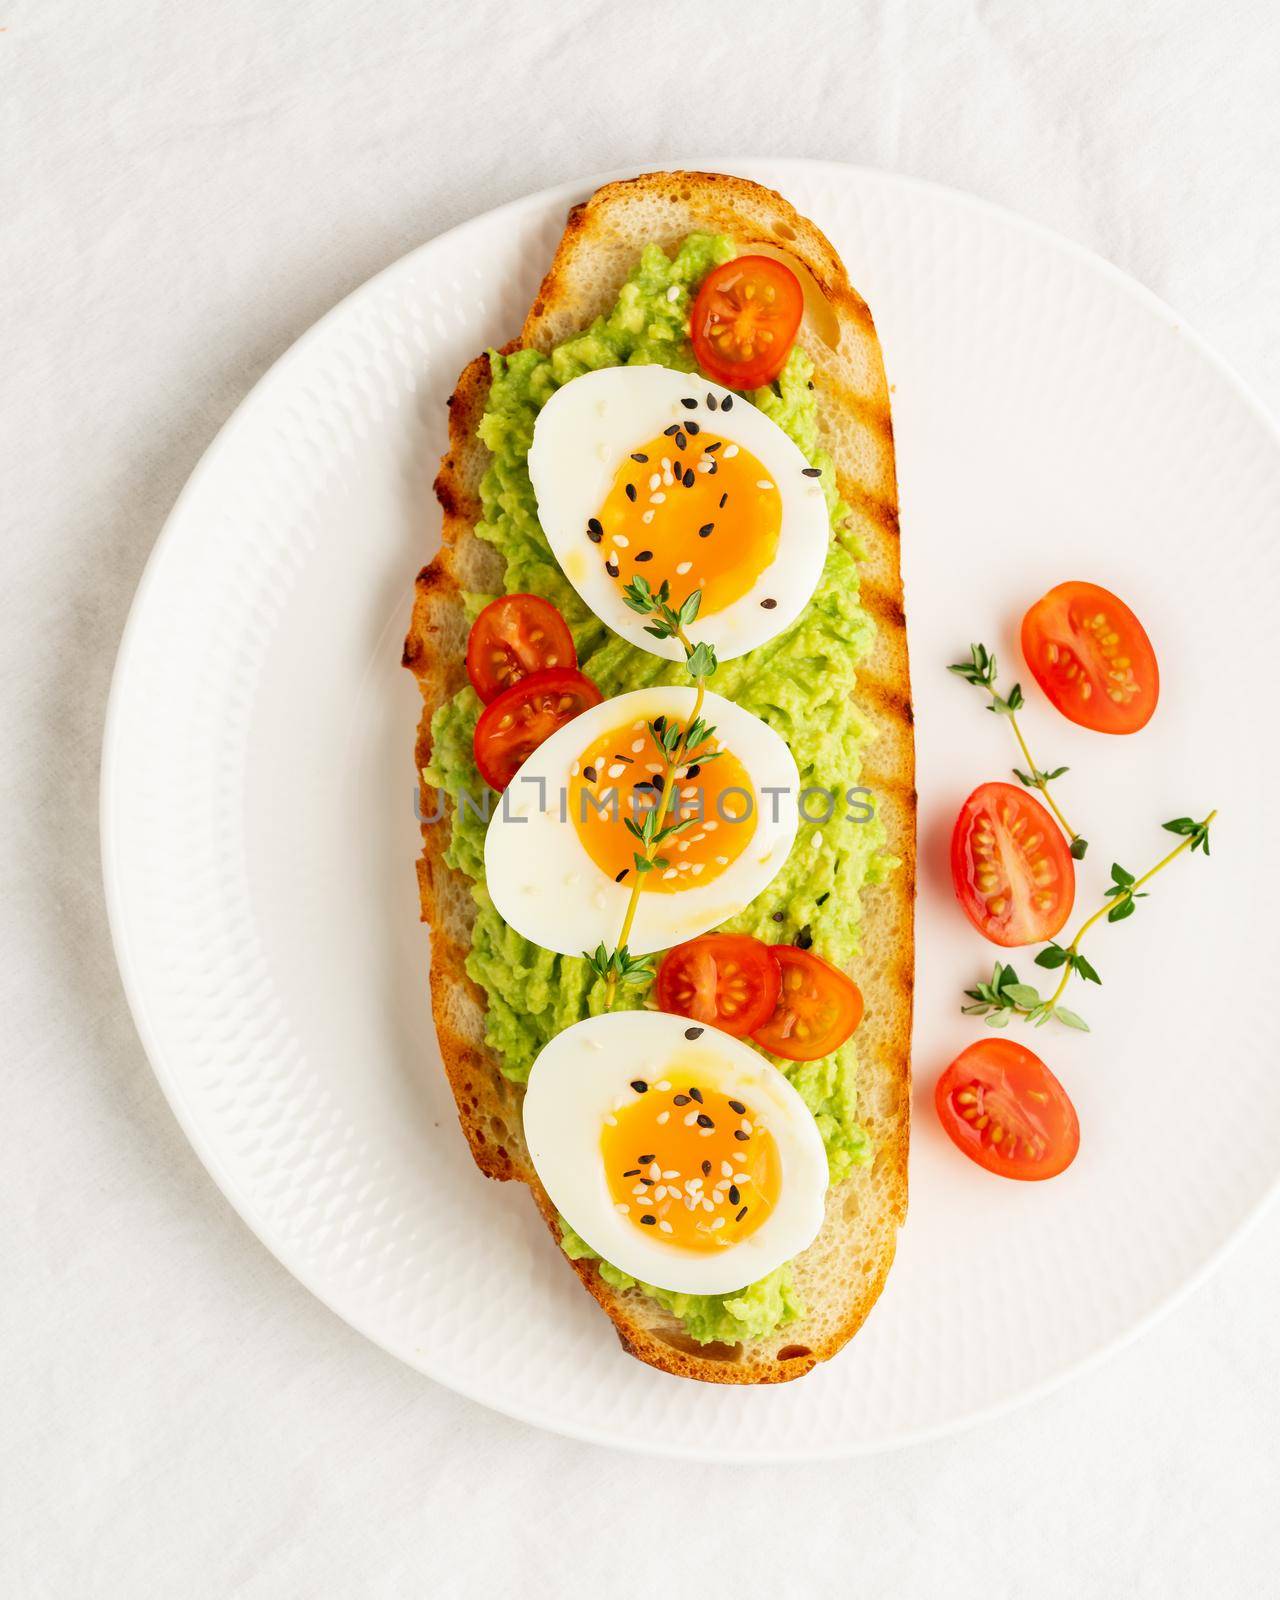 Avocado toast with toasted bread soft-boiled eggs with yellow yolk and tomatoes with herbs on white plate on light tablecloth